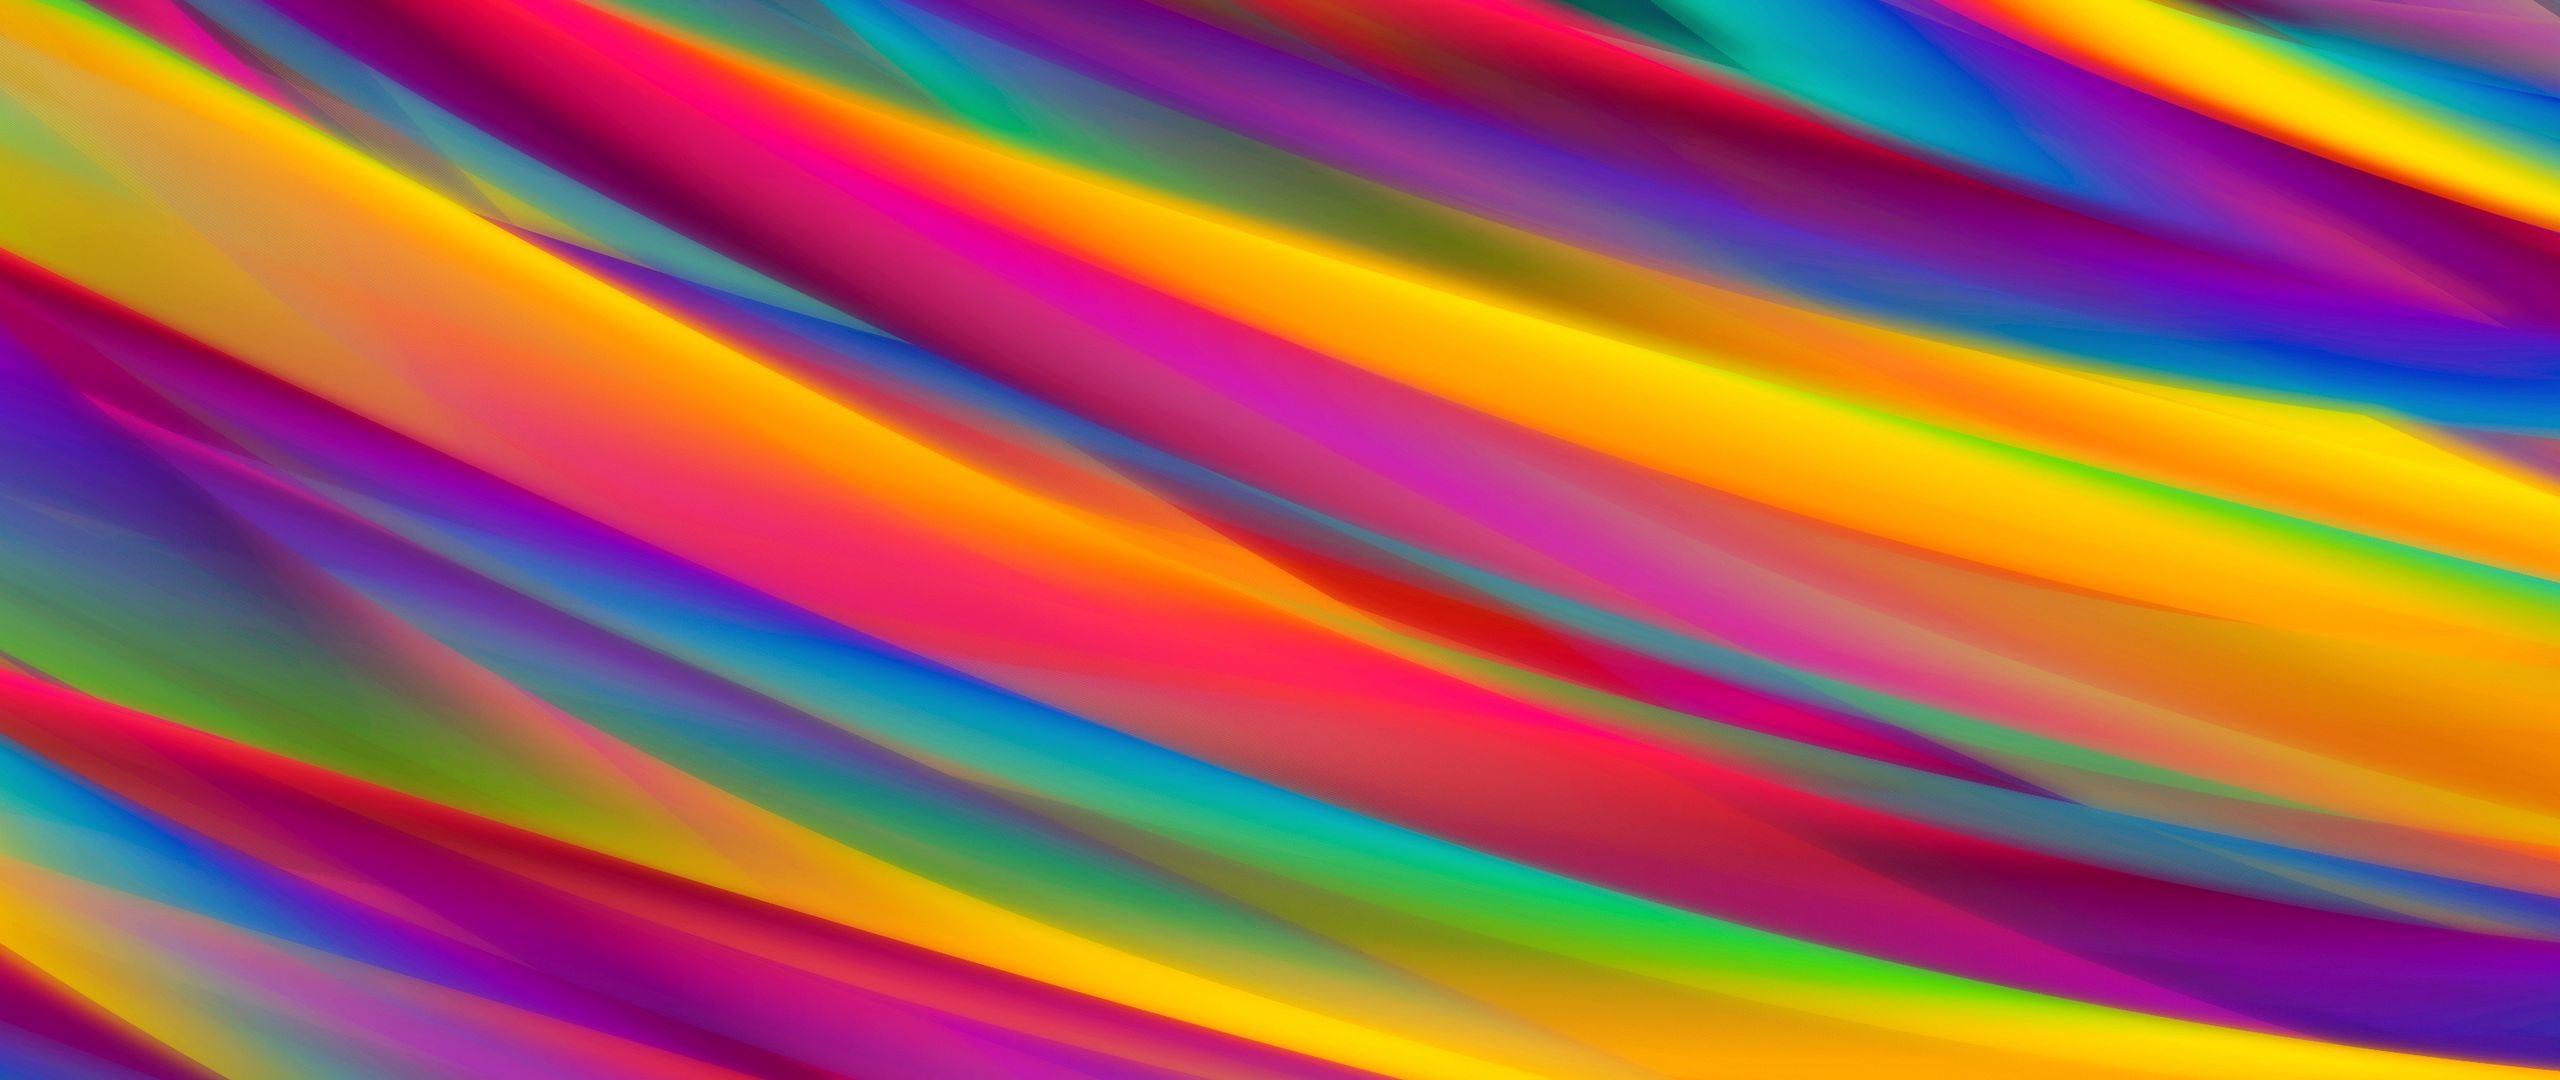 Download wallpaper 2560x1080 lines, multicolored, rainbow, stripes dual wide 1080p HD background